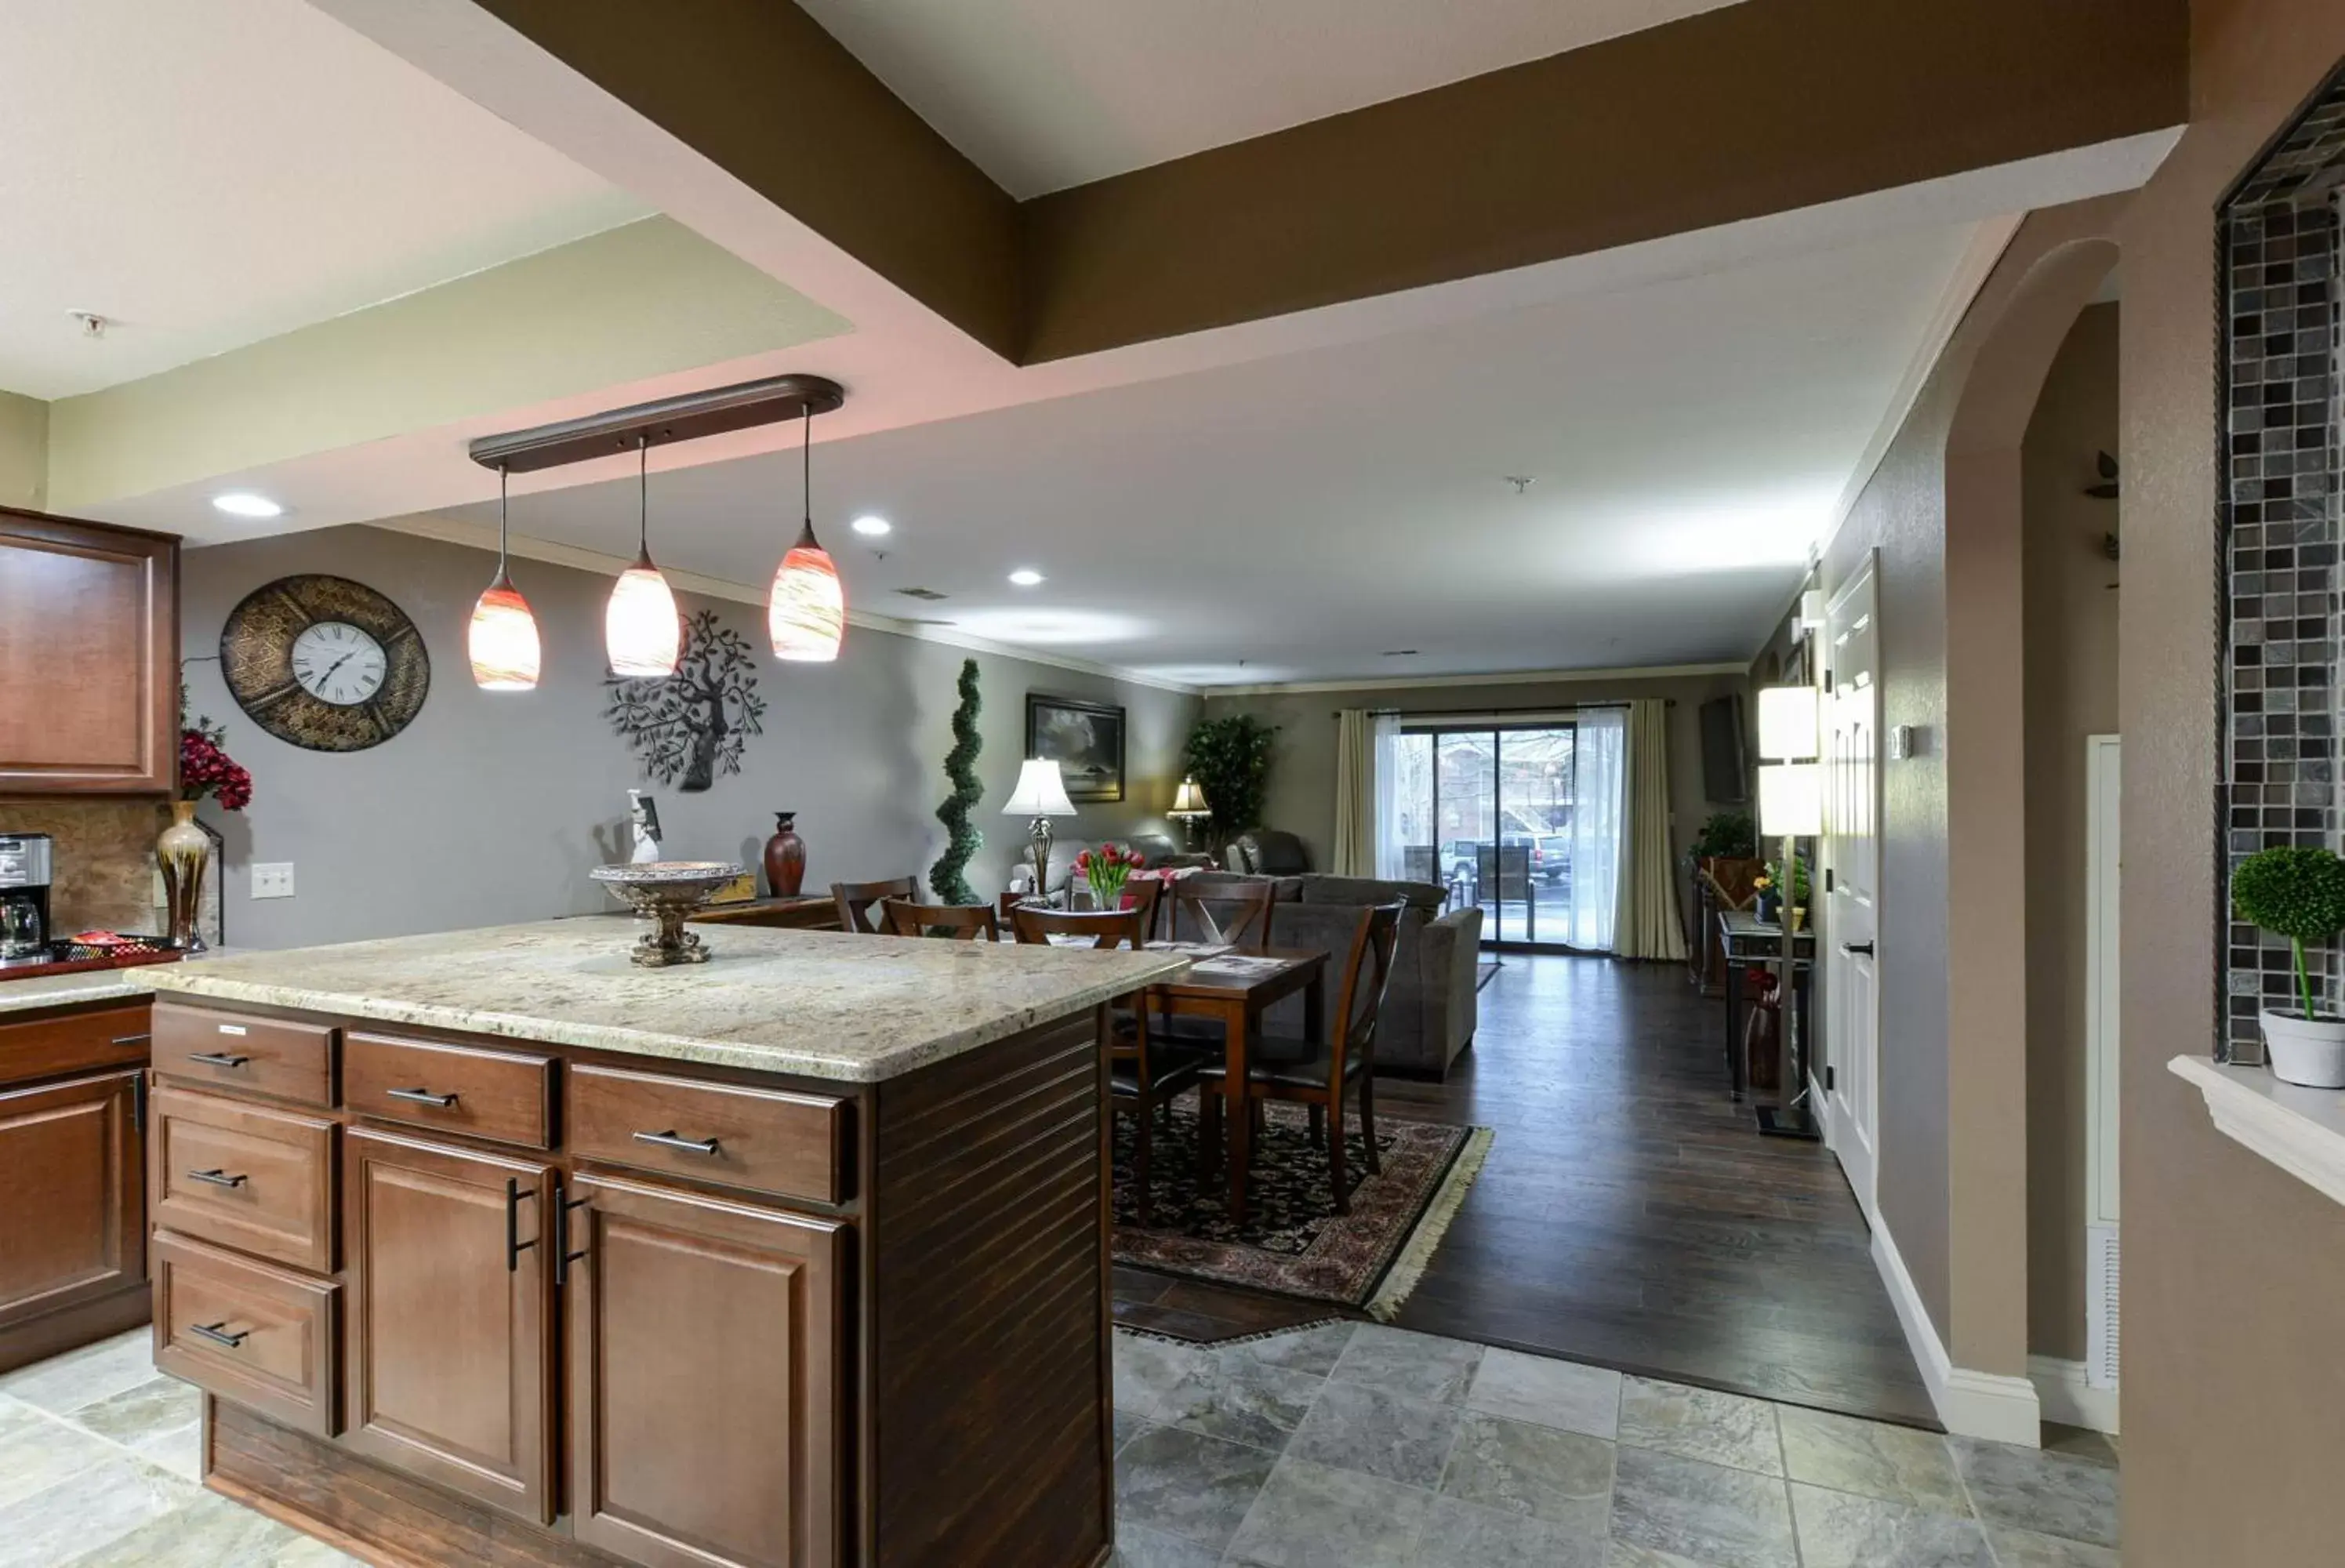 Kitchen/Kitchenette in Luxury Condos at Thousand Hills - Branson -Beautifully Remodeled